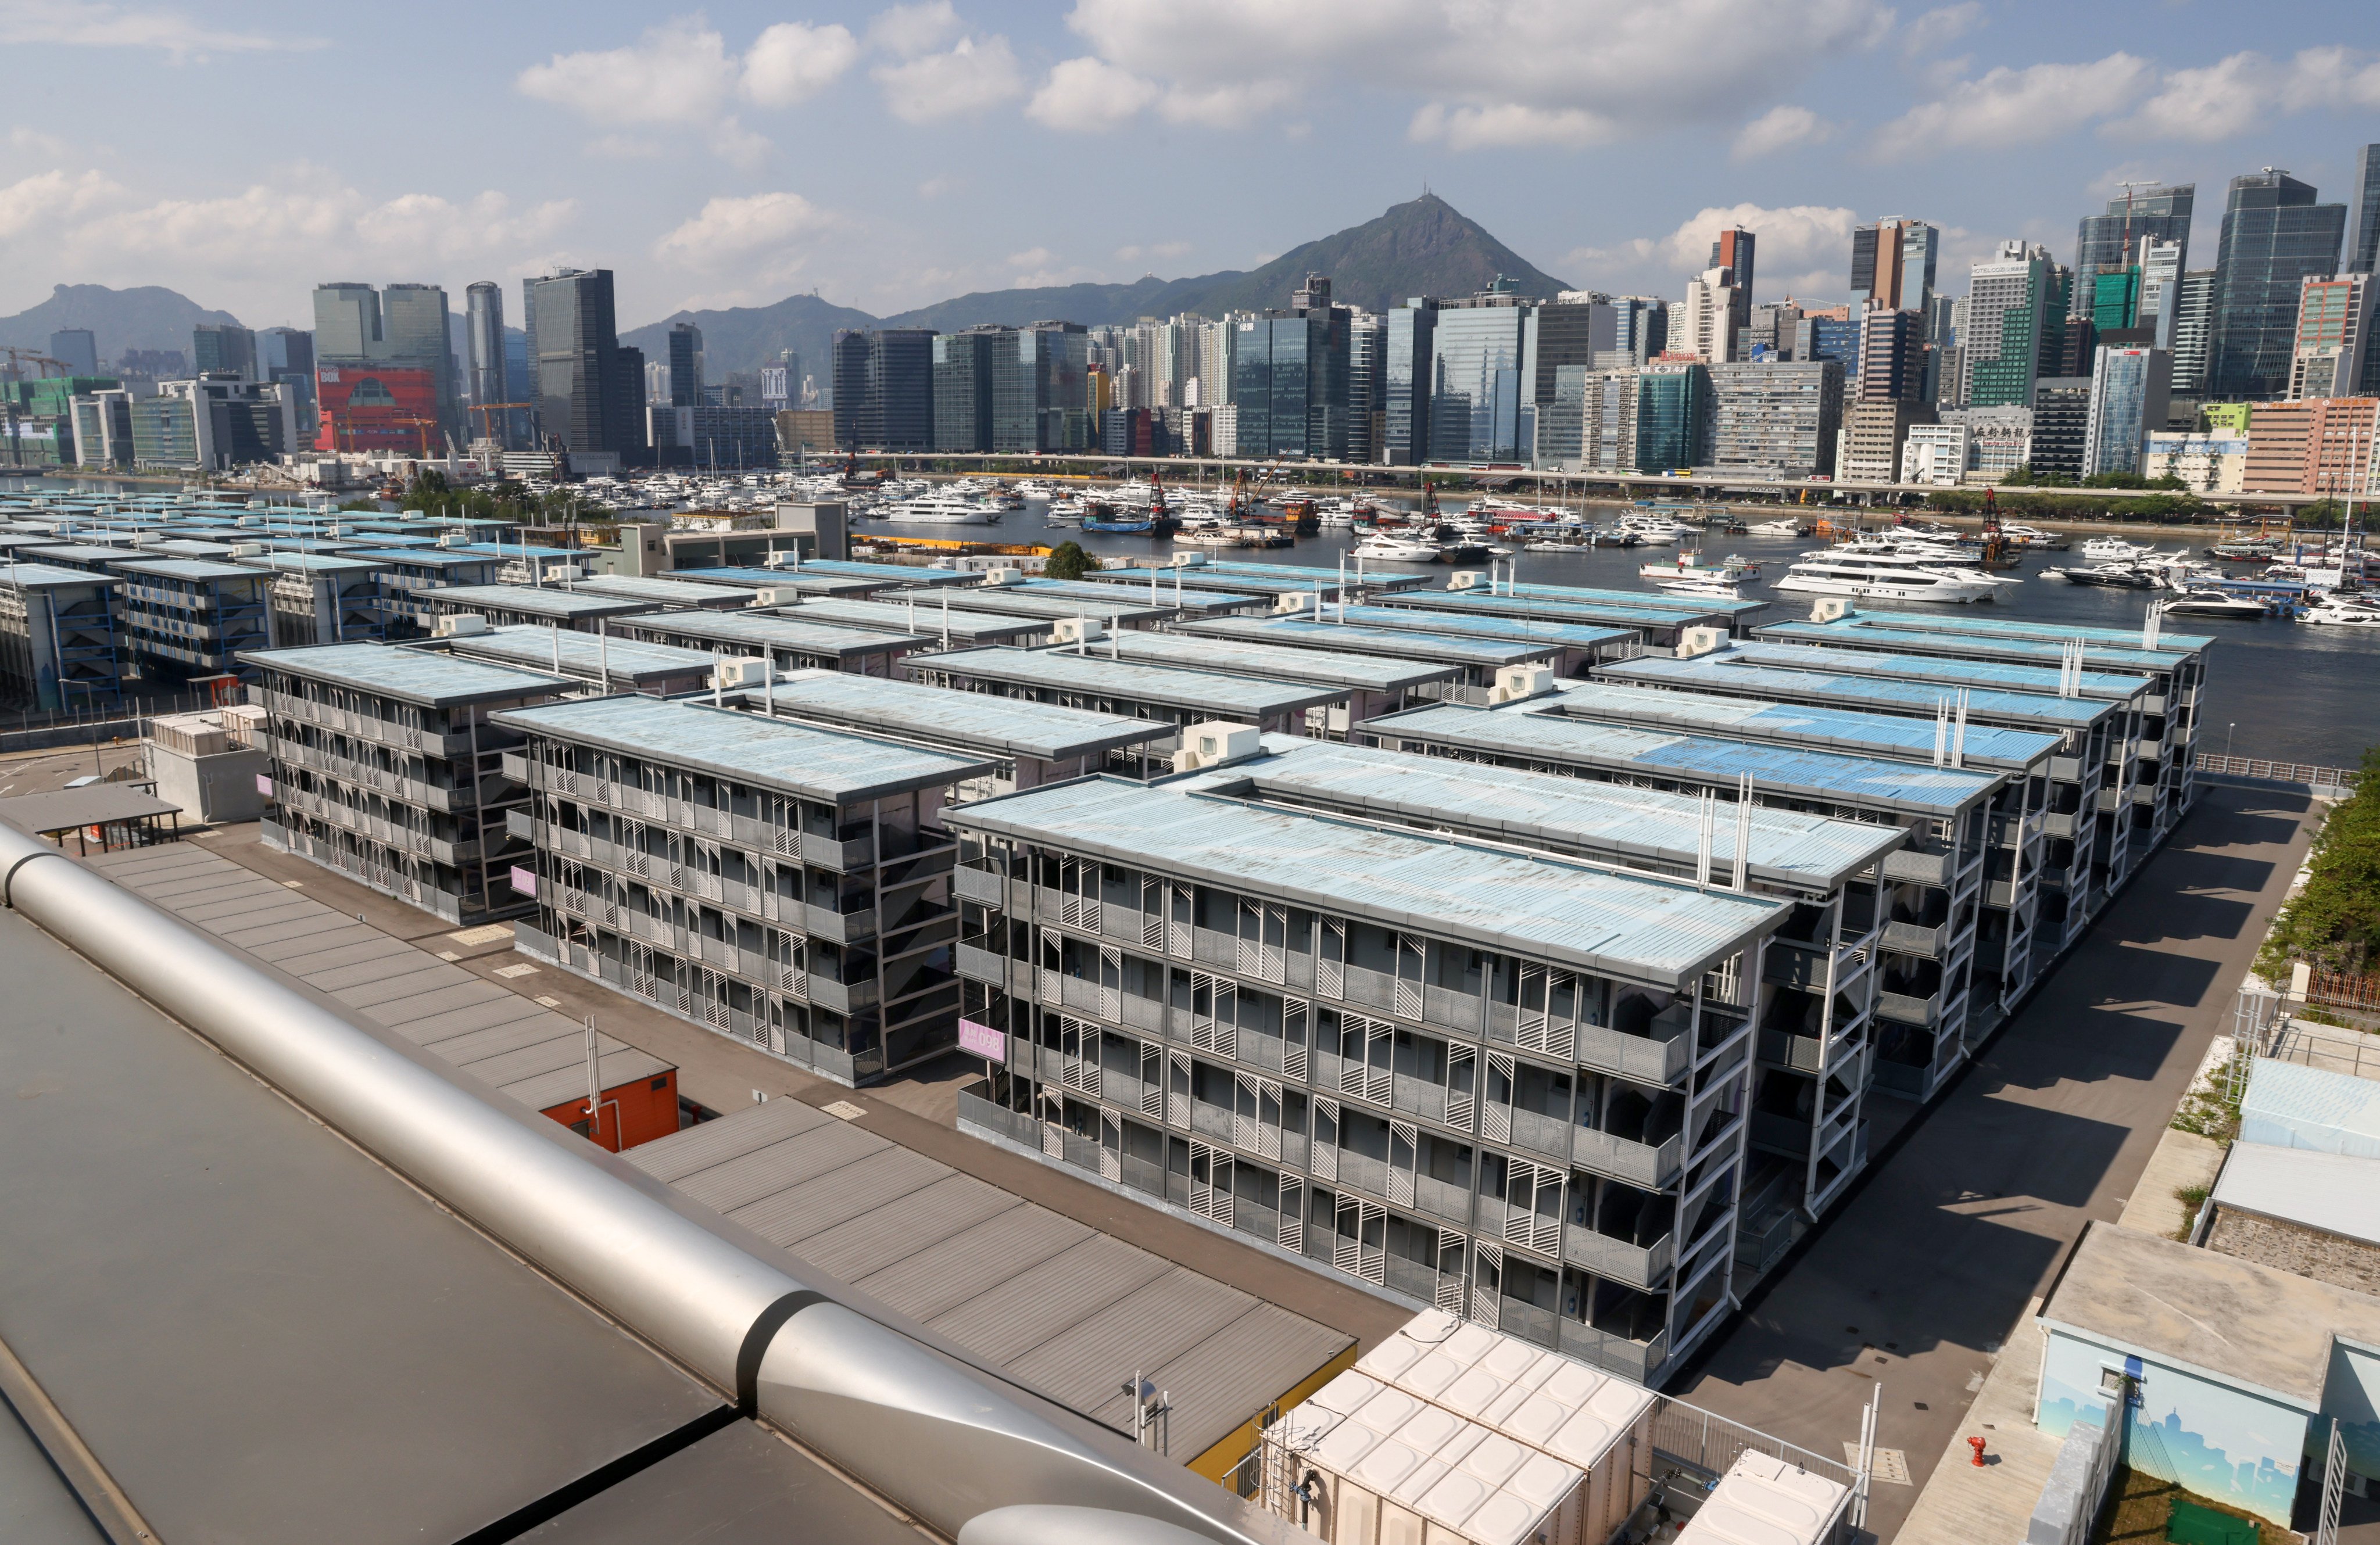 The former Kai Tak Covid-19 quarantine centre could become a centre for the arts, a minister says. Photo: Yik Yeung-man